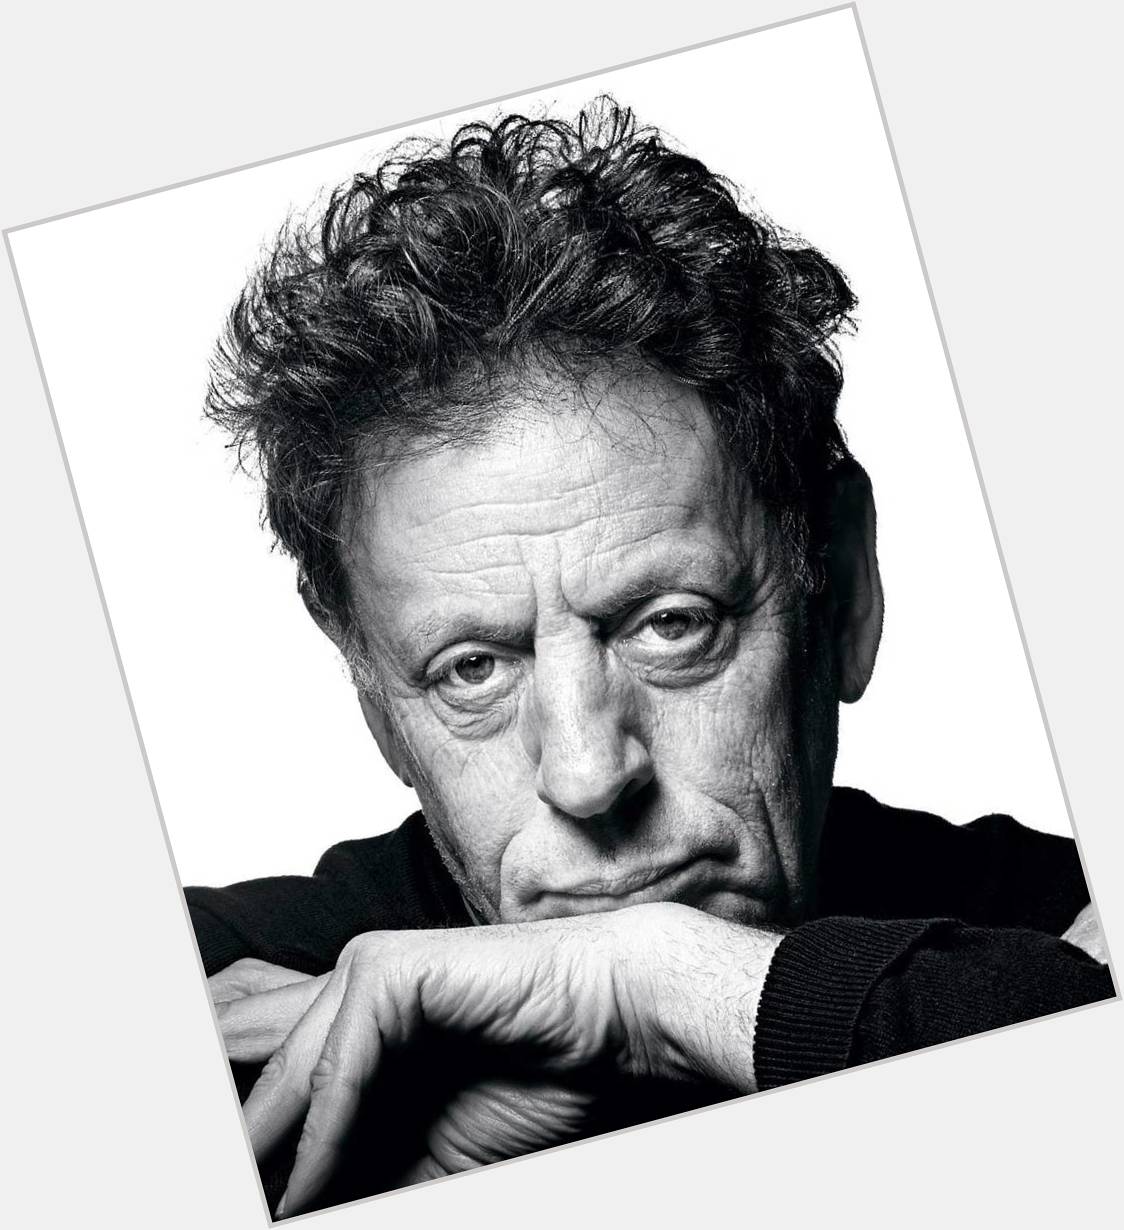 Happy Birthday, Philip Glass!
We can t wait to celebrate his 80th birthday with our upcomi 